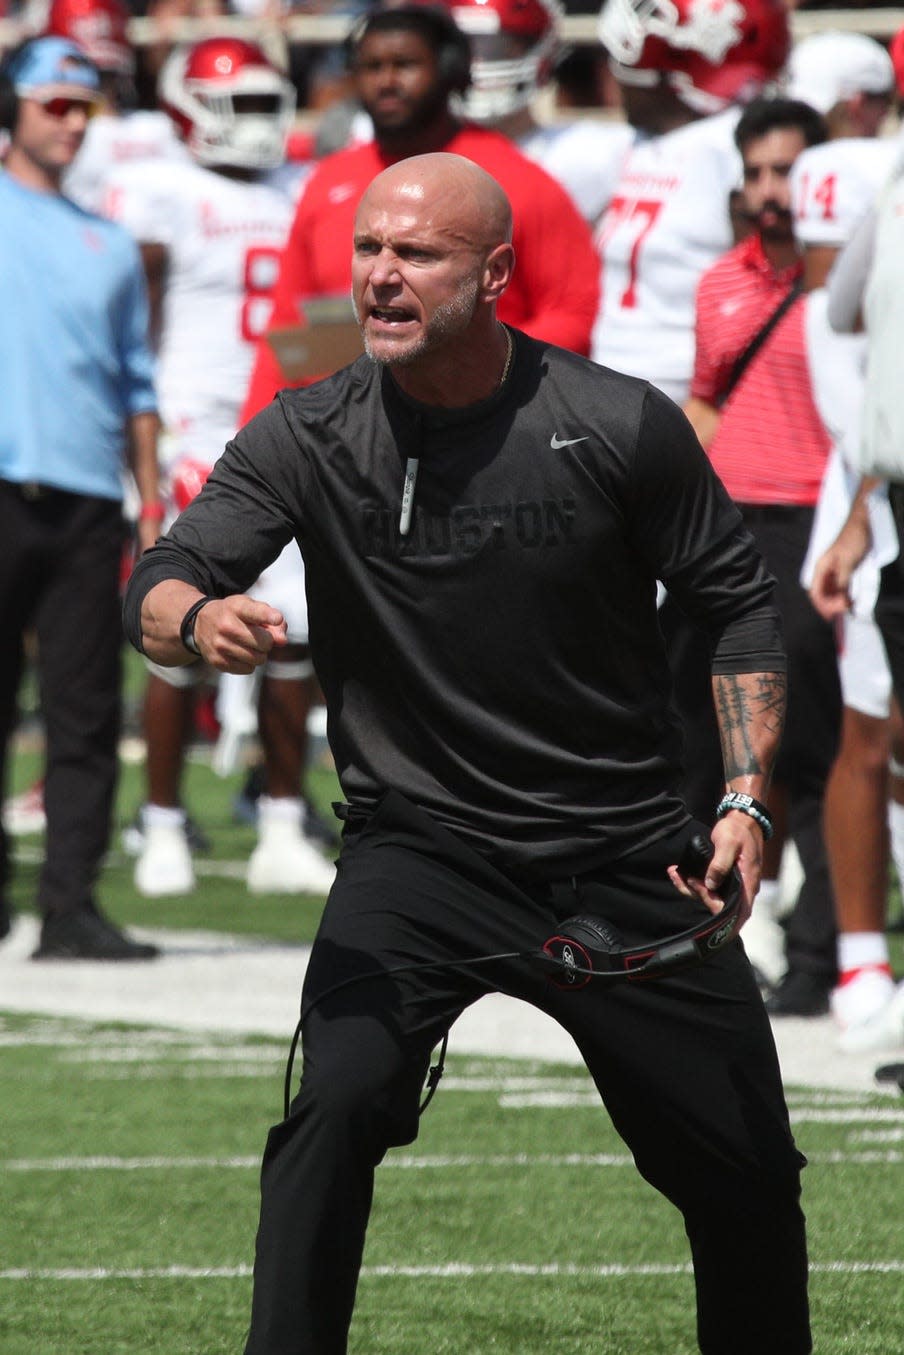 Sep 10, 2022; Lubbock, Texas, USA; Houston Cougars defensive line coach Brian Early on the field in the second half during the game against the Texas Tech Red Raiders at Jones AT&T Stadium and Cody Campbell Field. Mandatory Credit: Michael C. Johnson-USA TODAY Sports